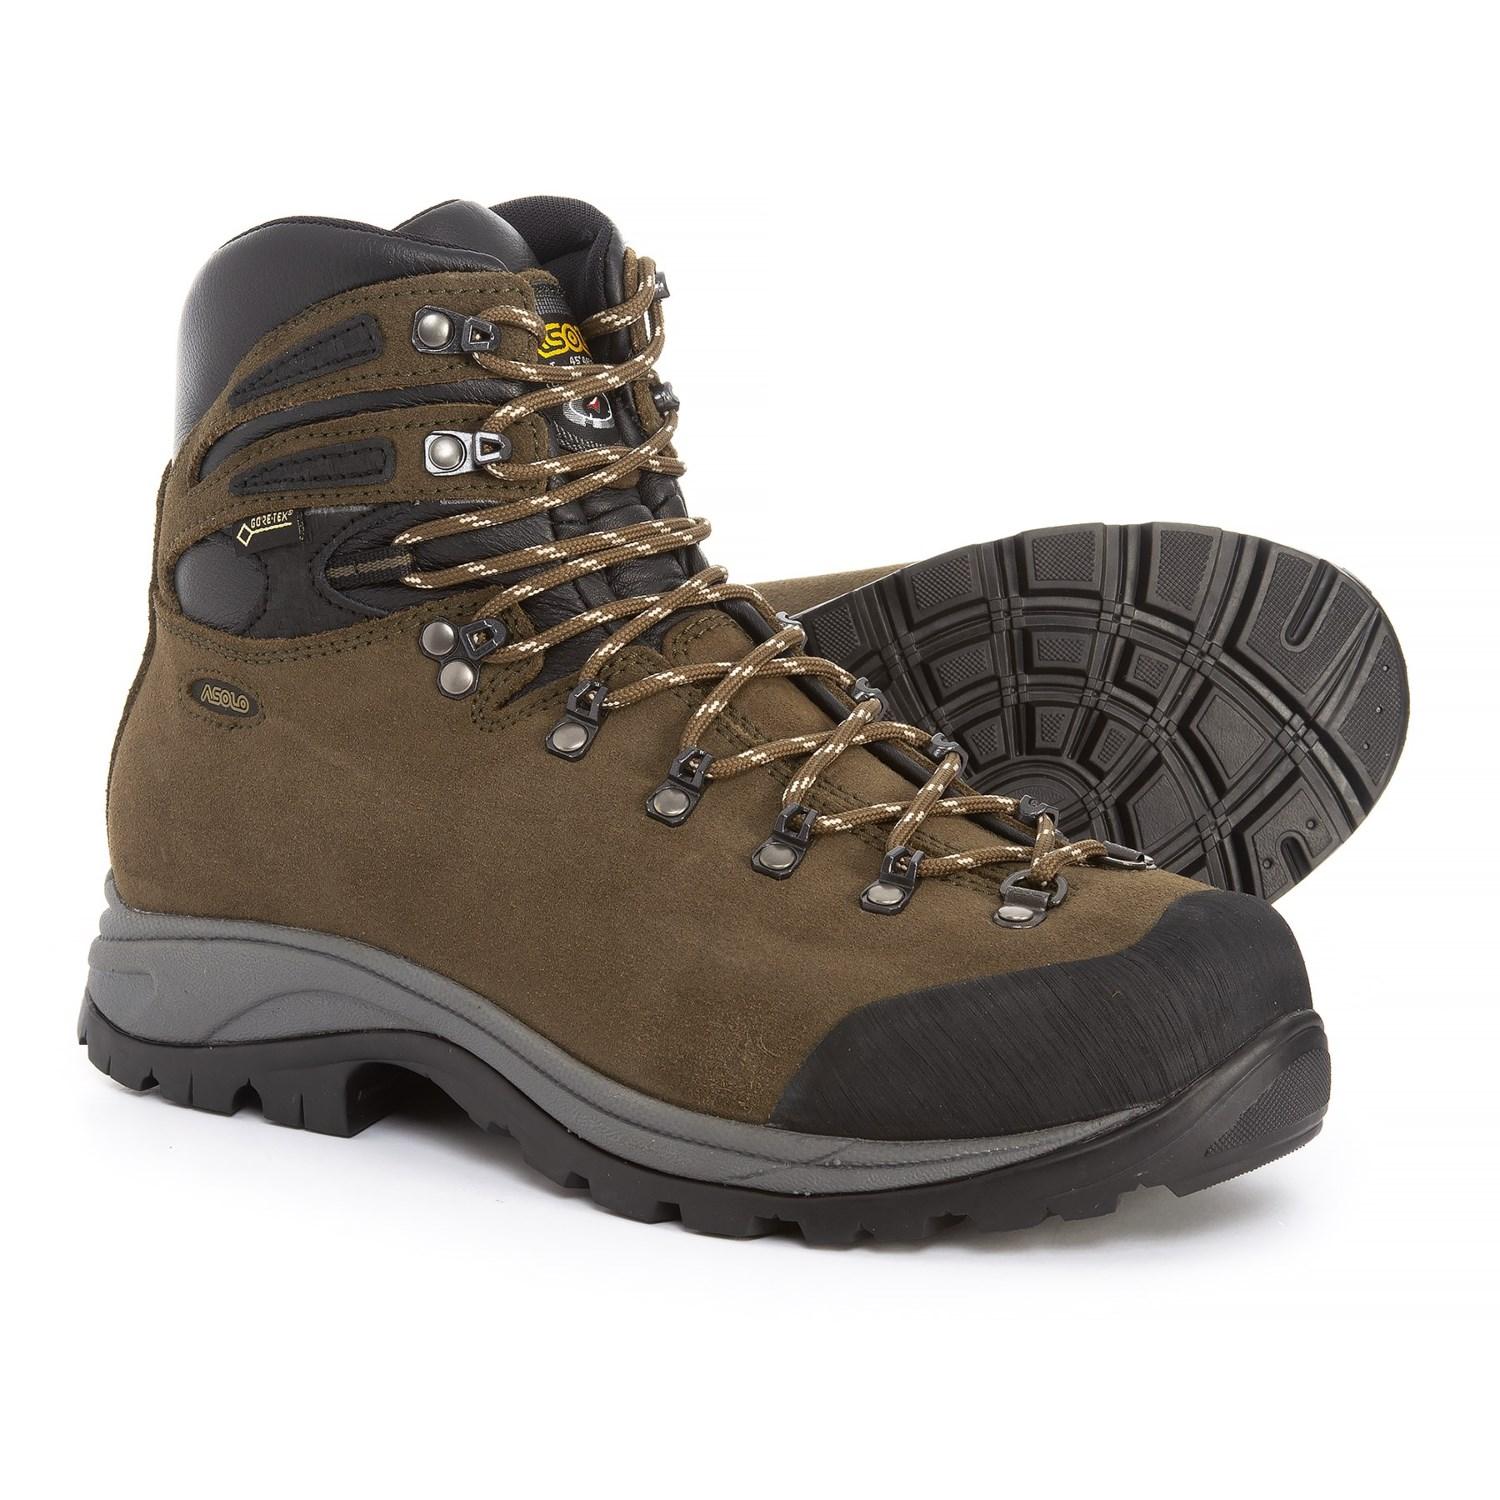 Asolo Tribe Gv Gore-tex(r) Hiking Boots in Brown for Men - Lyst